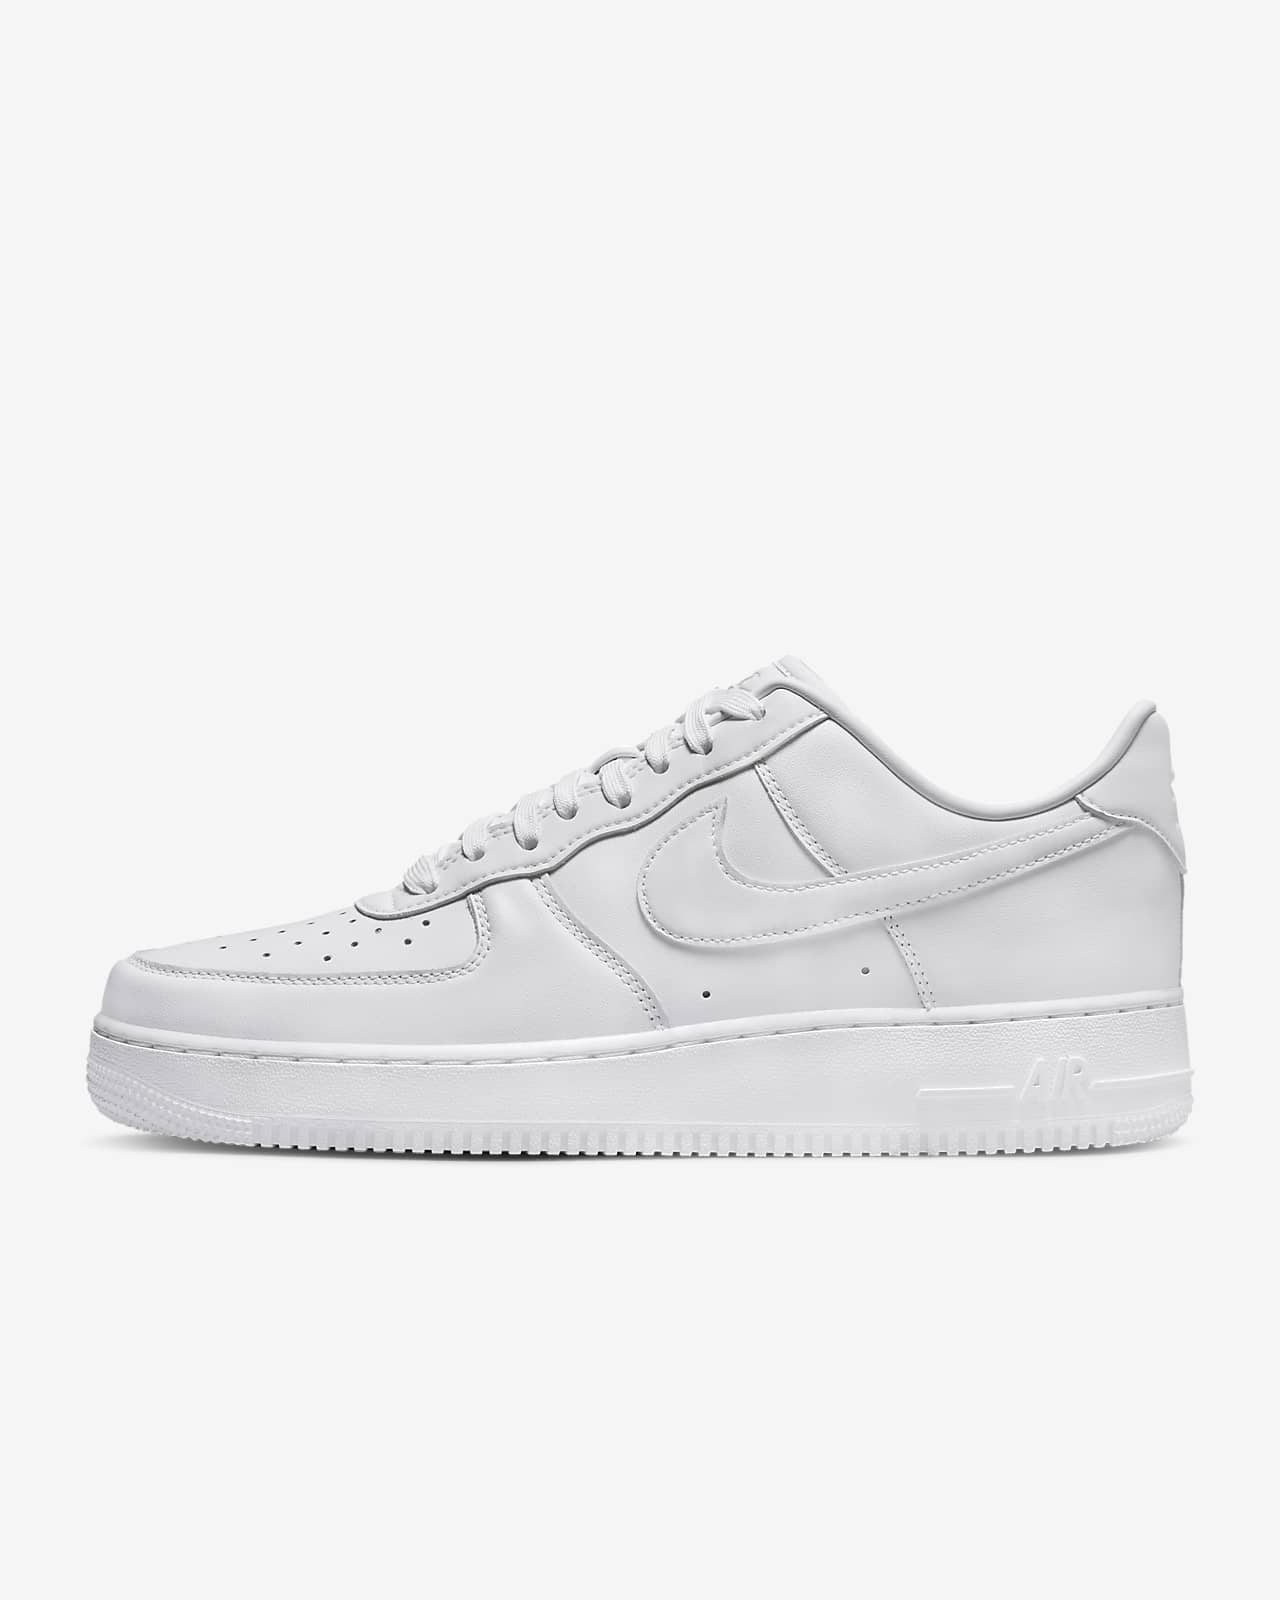 Nike Air Force 1 '07 LV8 1 Men's Basketball Shoes Size 11 